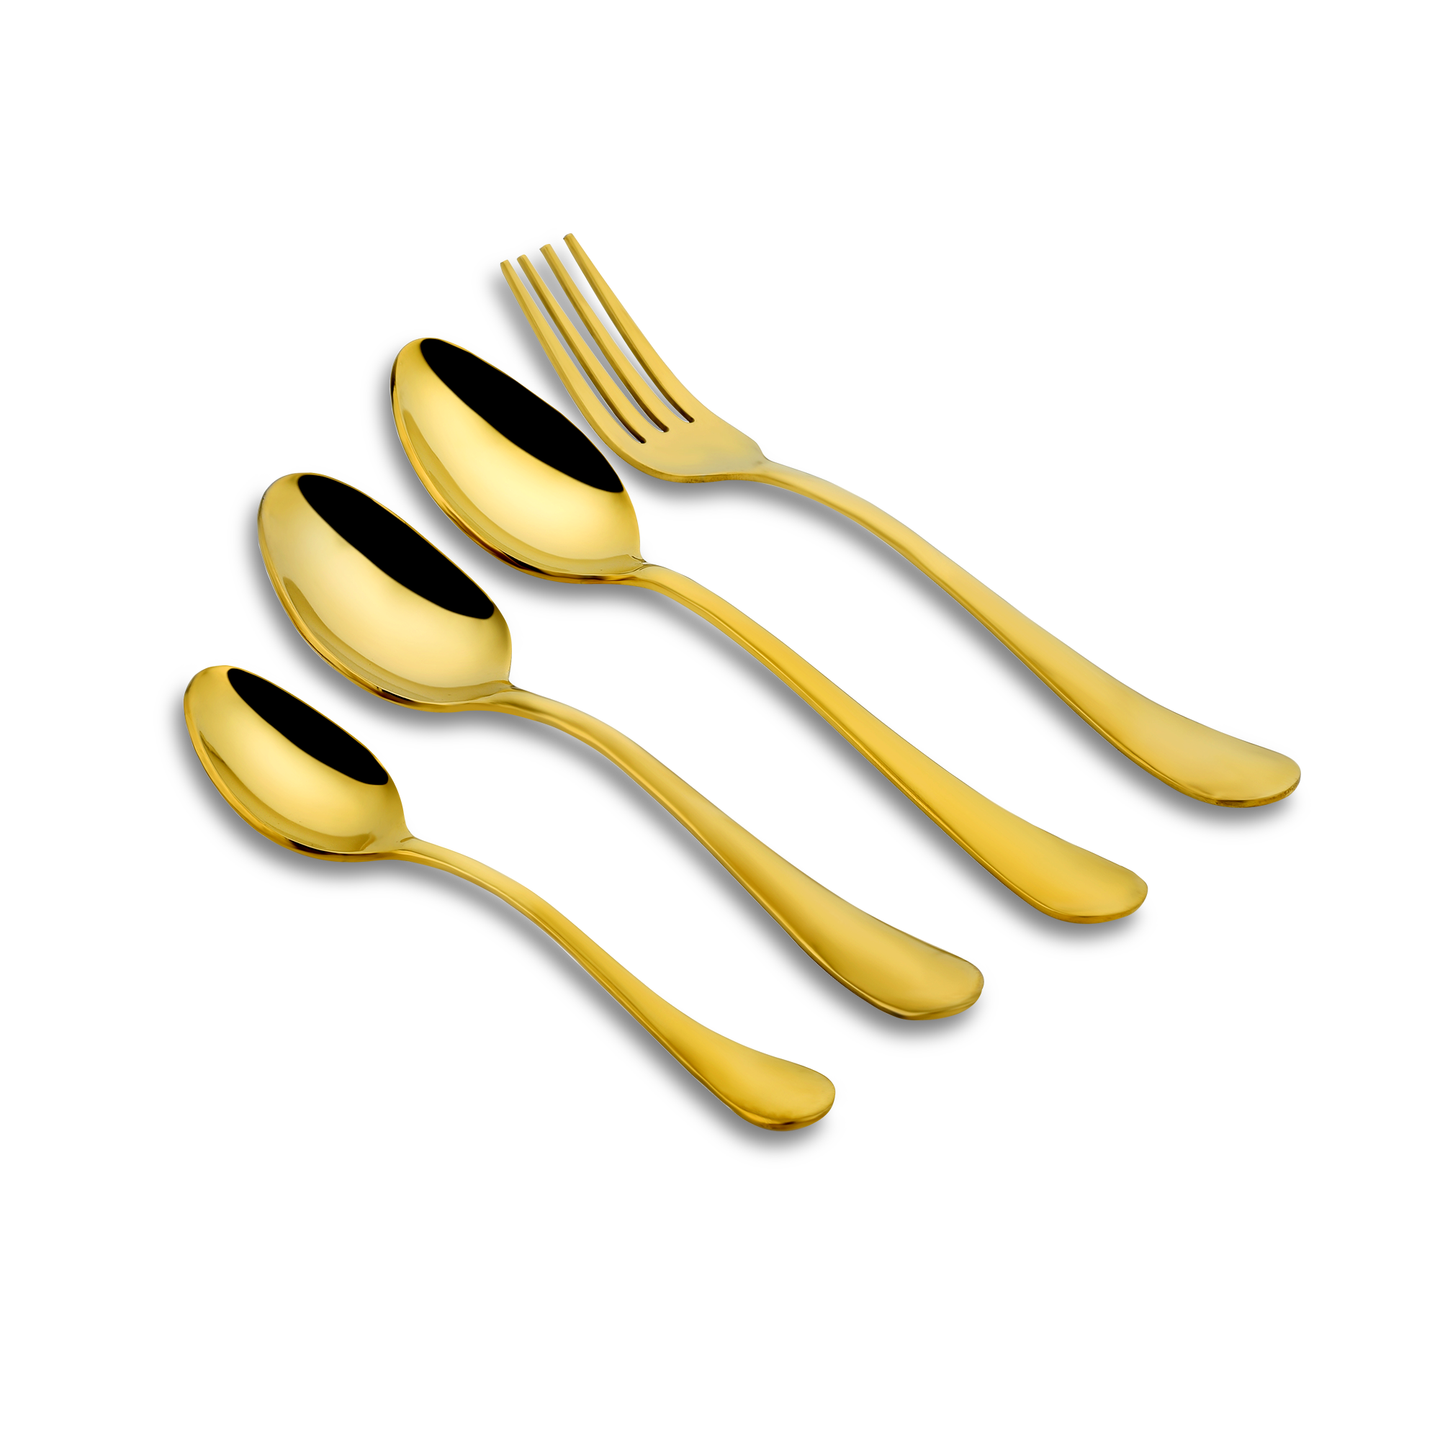 Aster (PVD gold) Stainless Steel Cutlery in Leatherite Box (24Pcs)